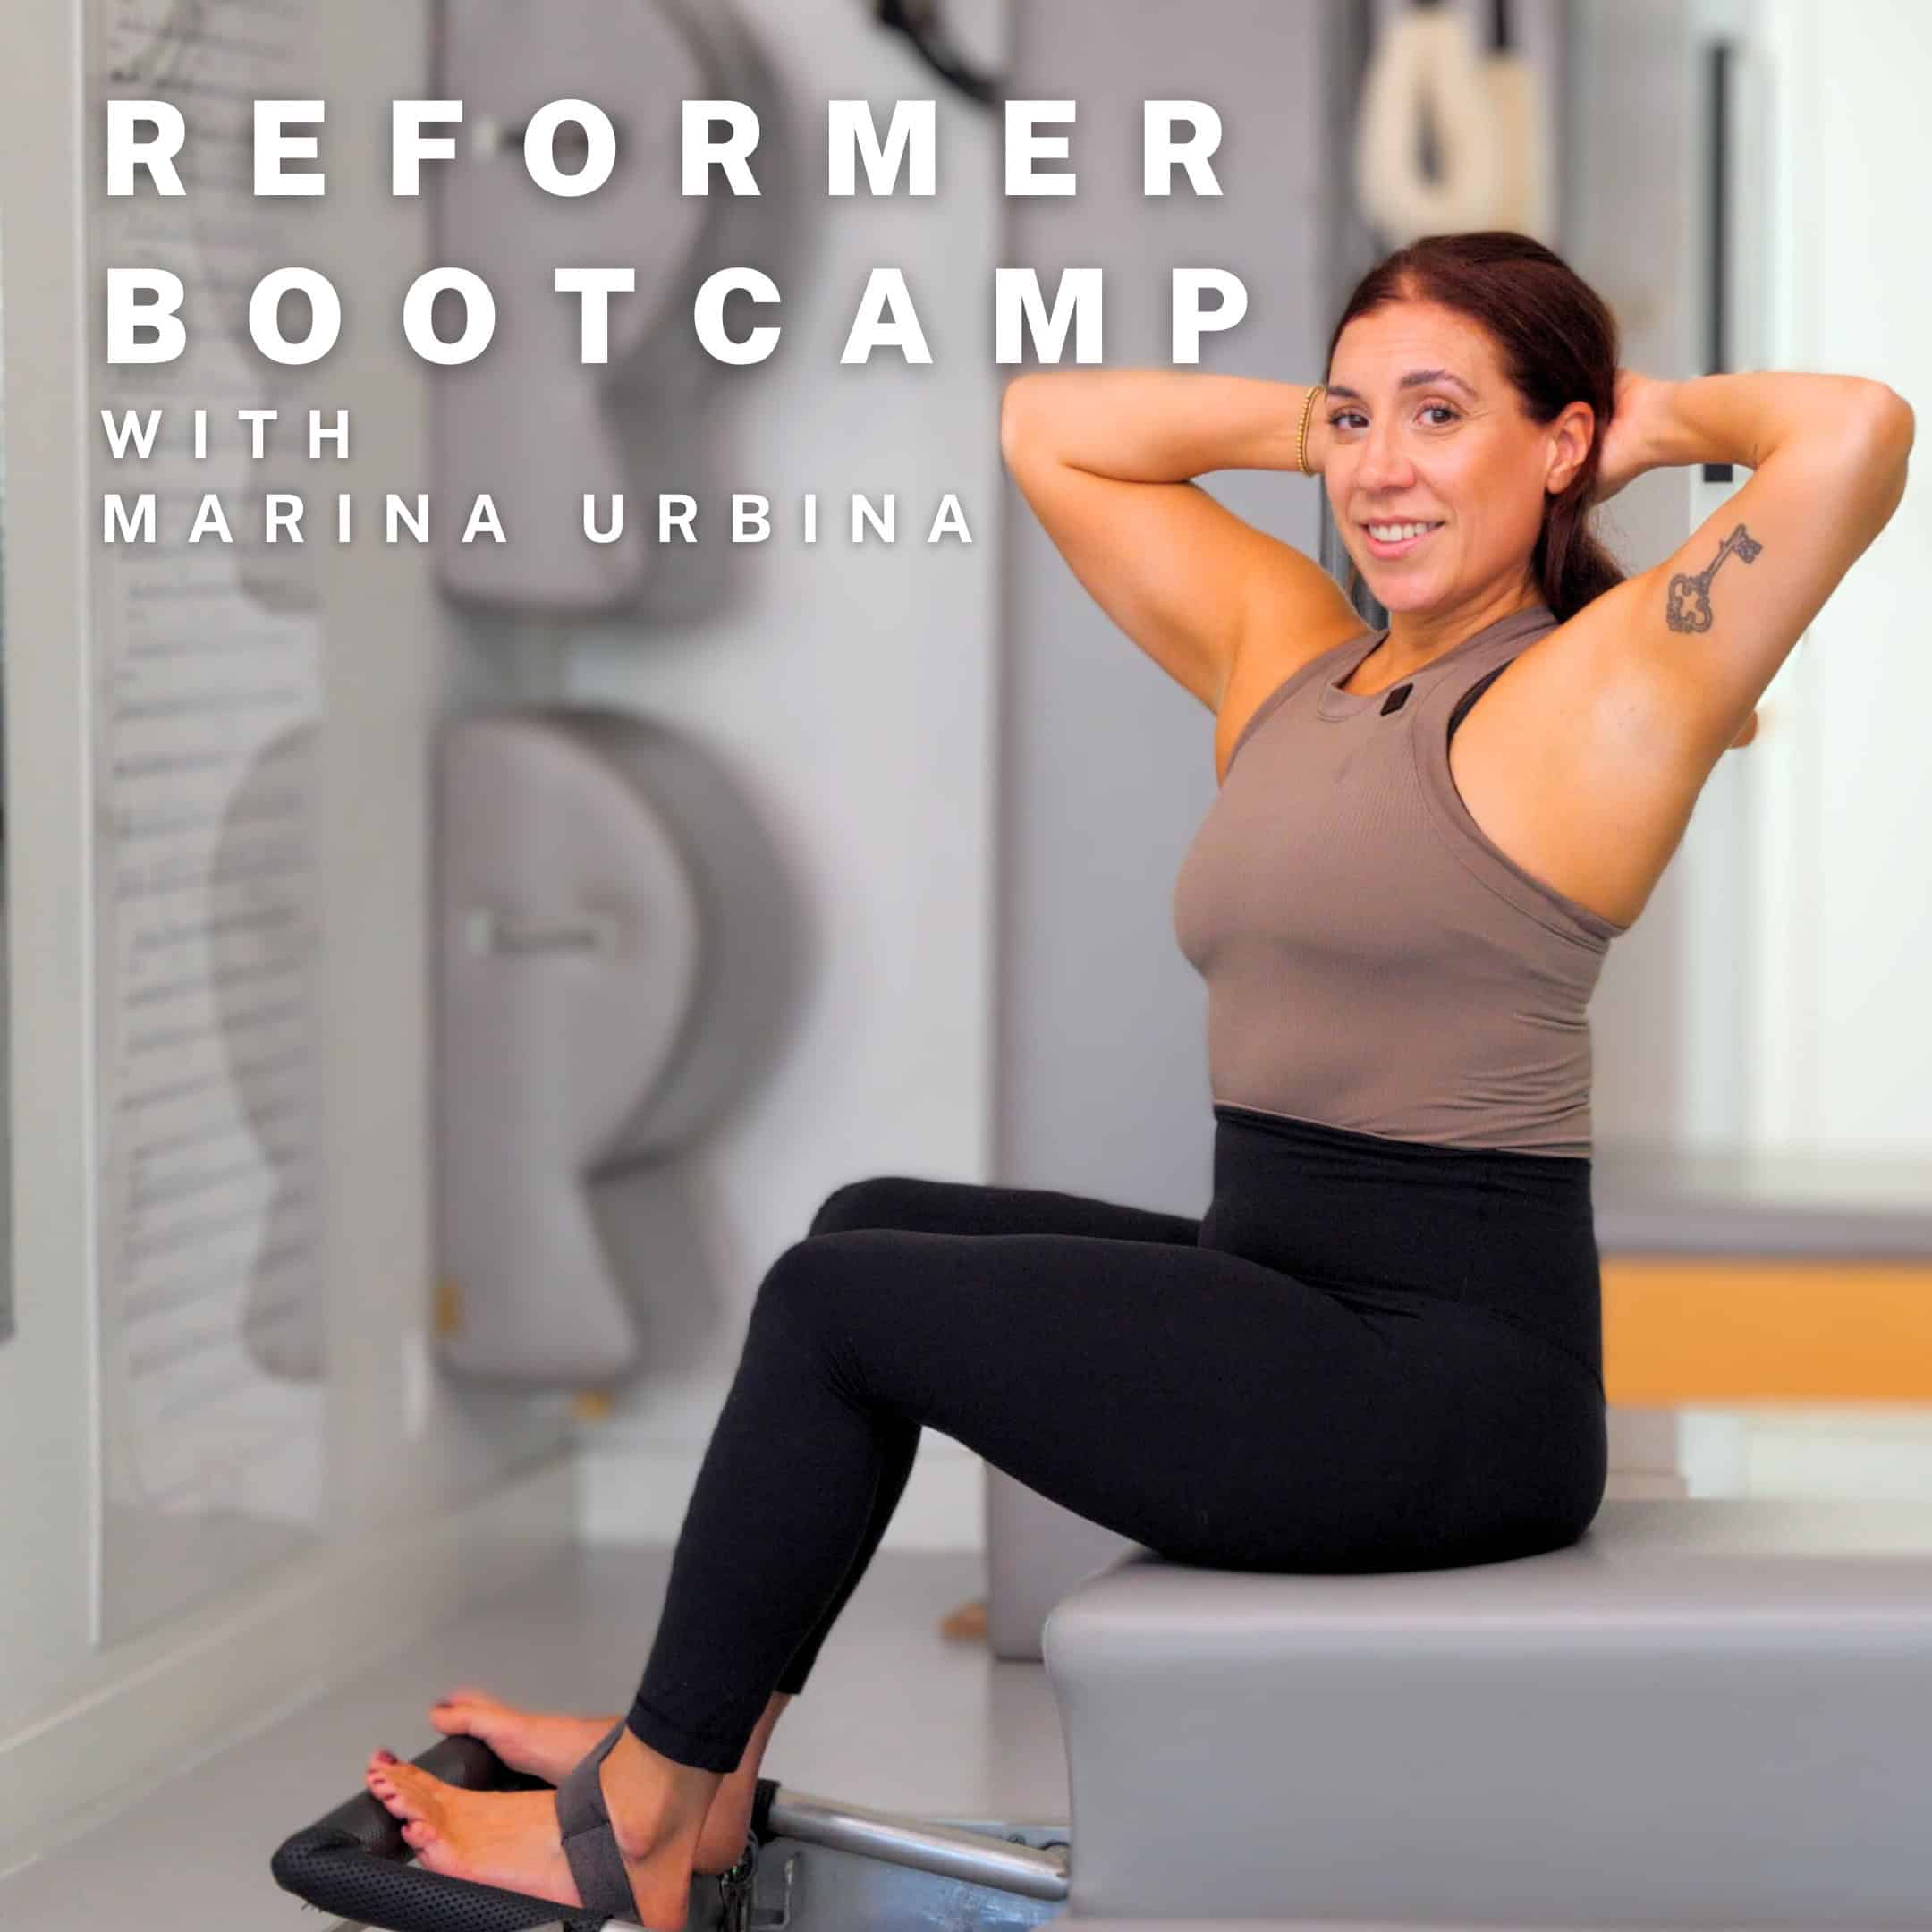 reformer bootcamp with marina urbina - launches july 9th